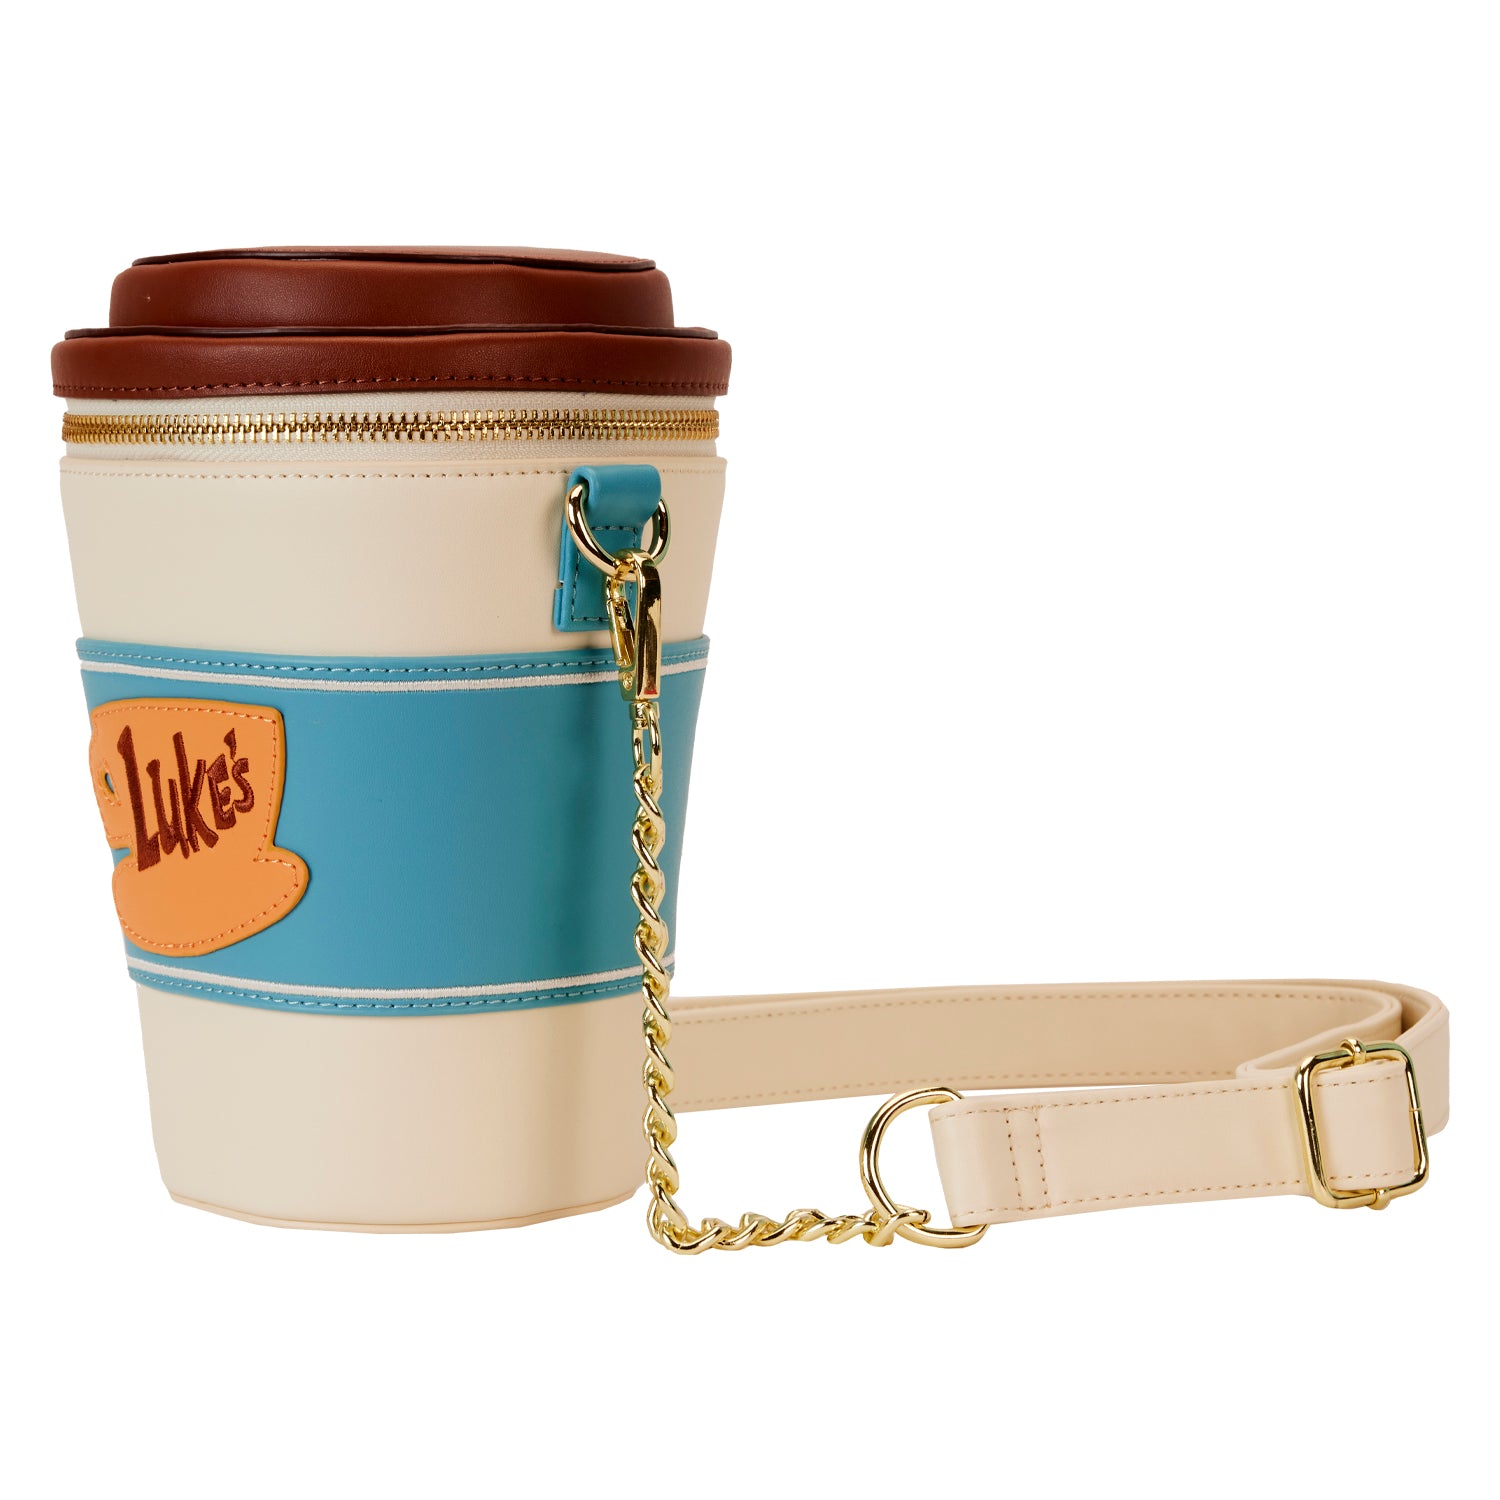 Loungefly x Gilmore Girls Luke's Diner To-Go Cup Crossbody Bag